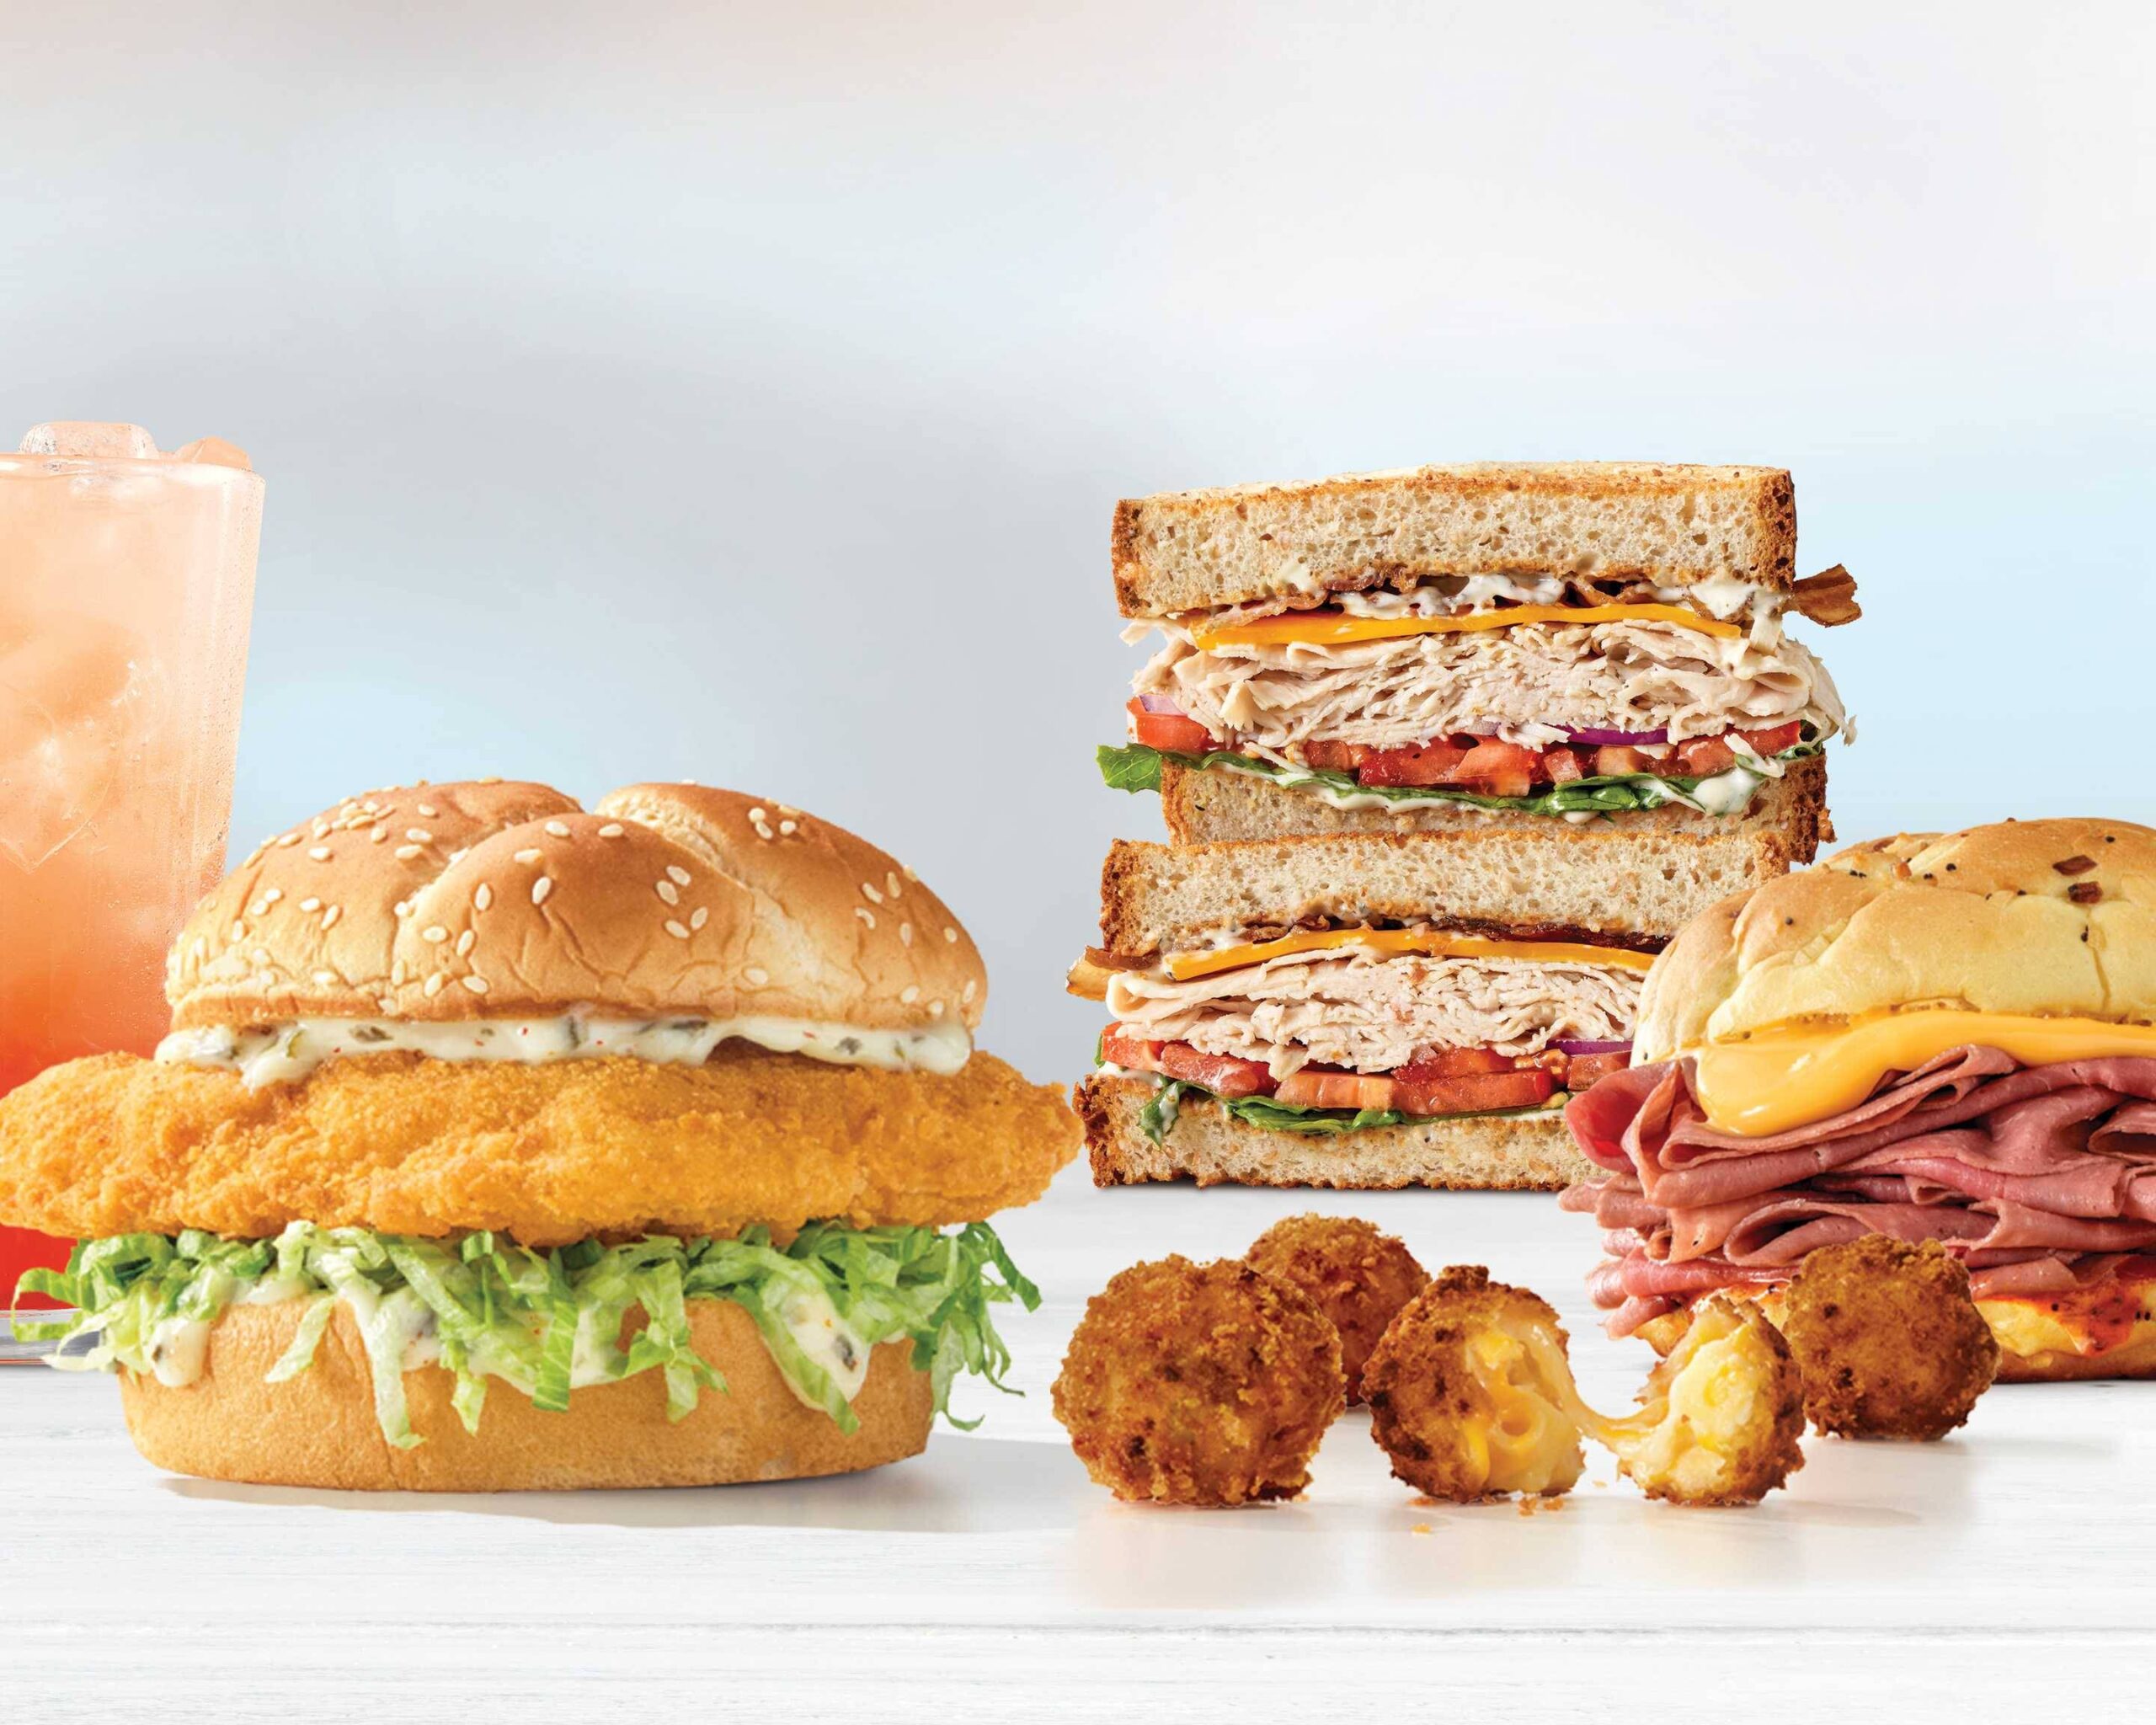 Arby’s Introduces Month of Free Sandwiches